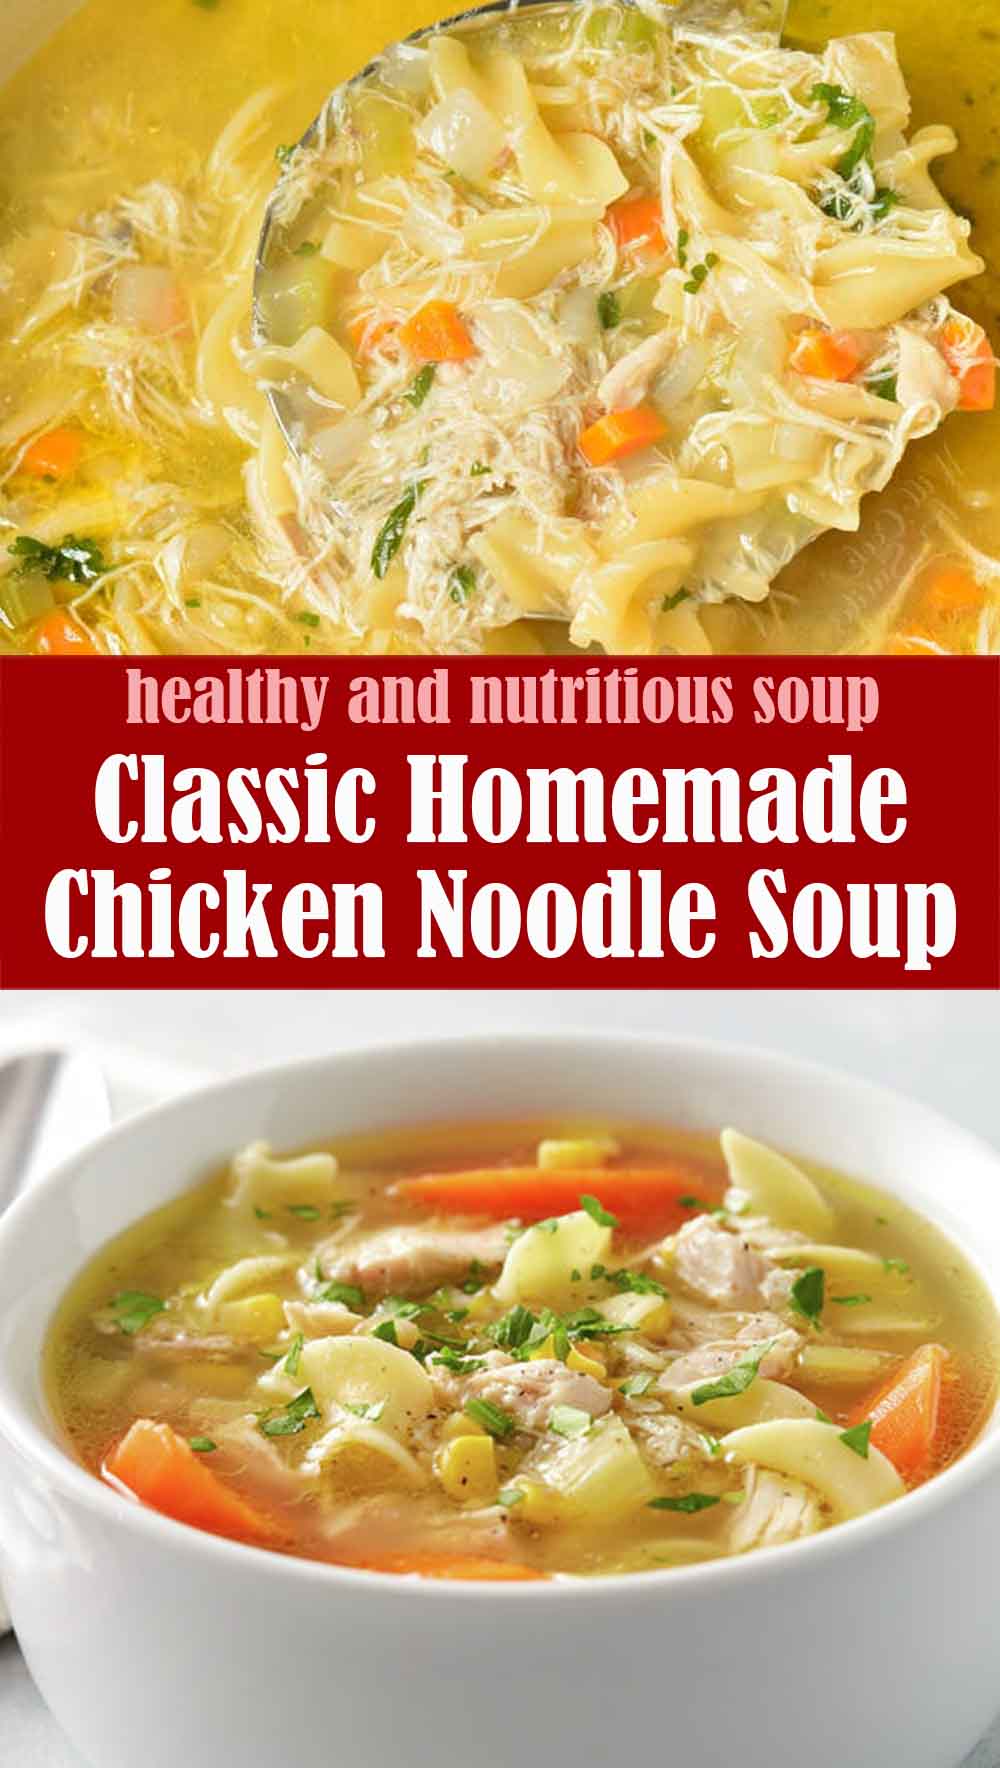 Classic Homemade Chicken Noodle Soup